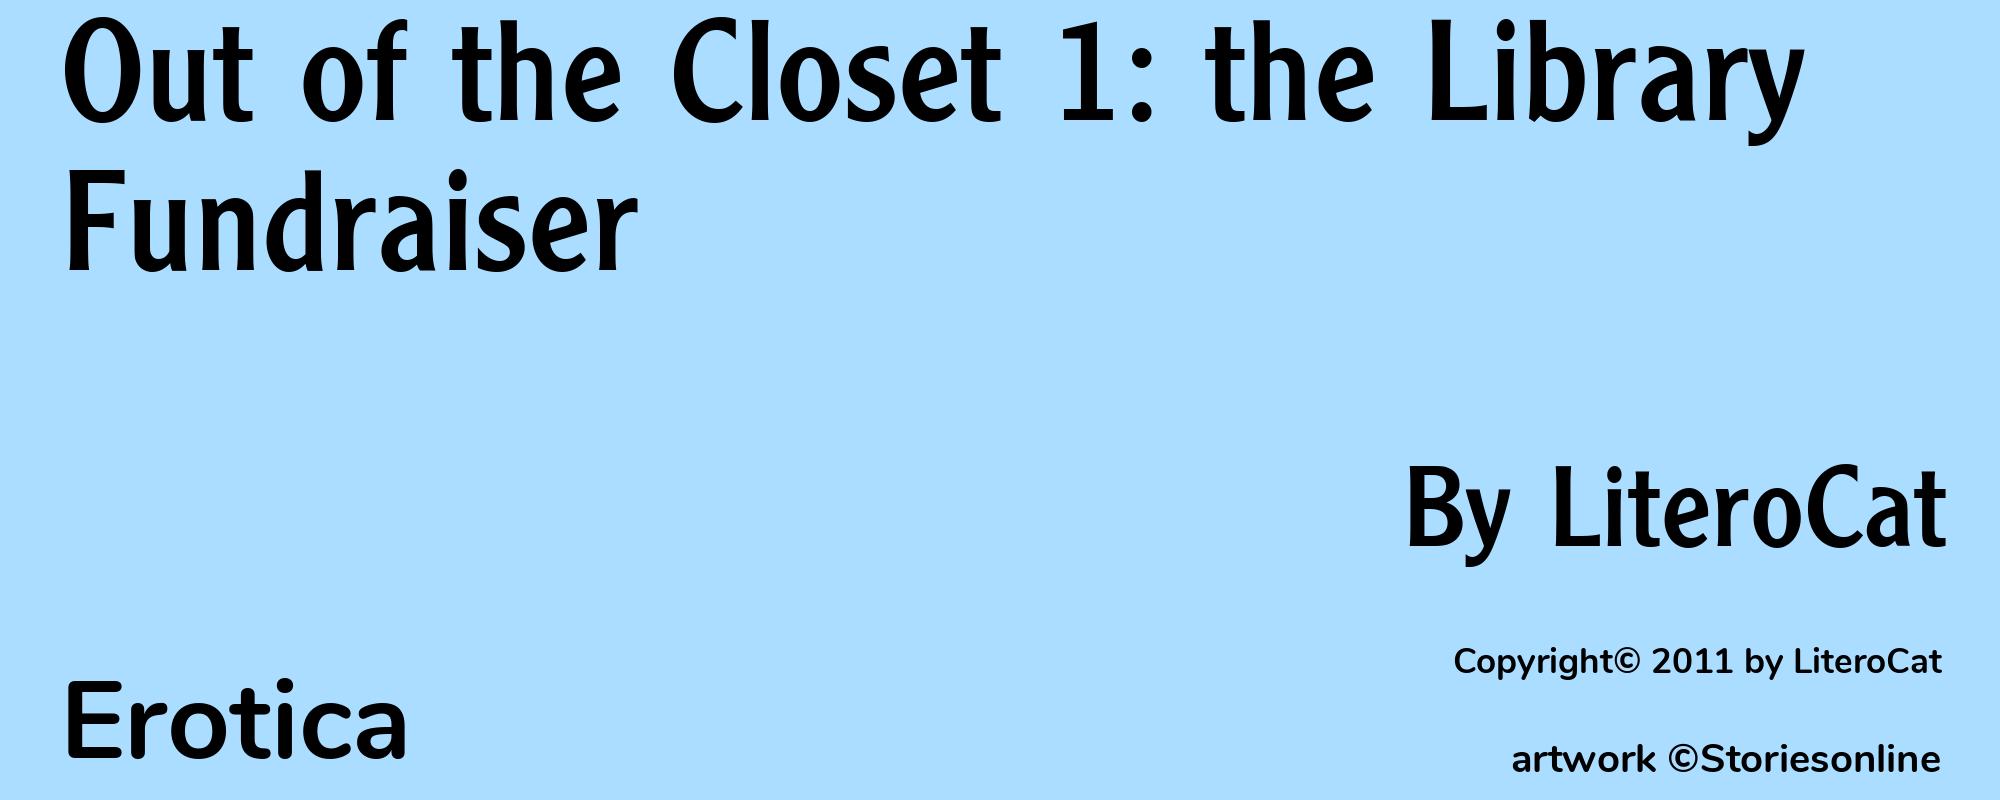 Out of the Closet 1: the Library Fundraiser - Cover